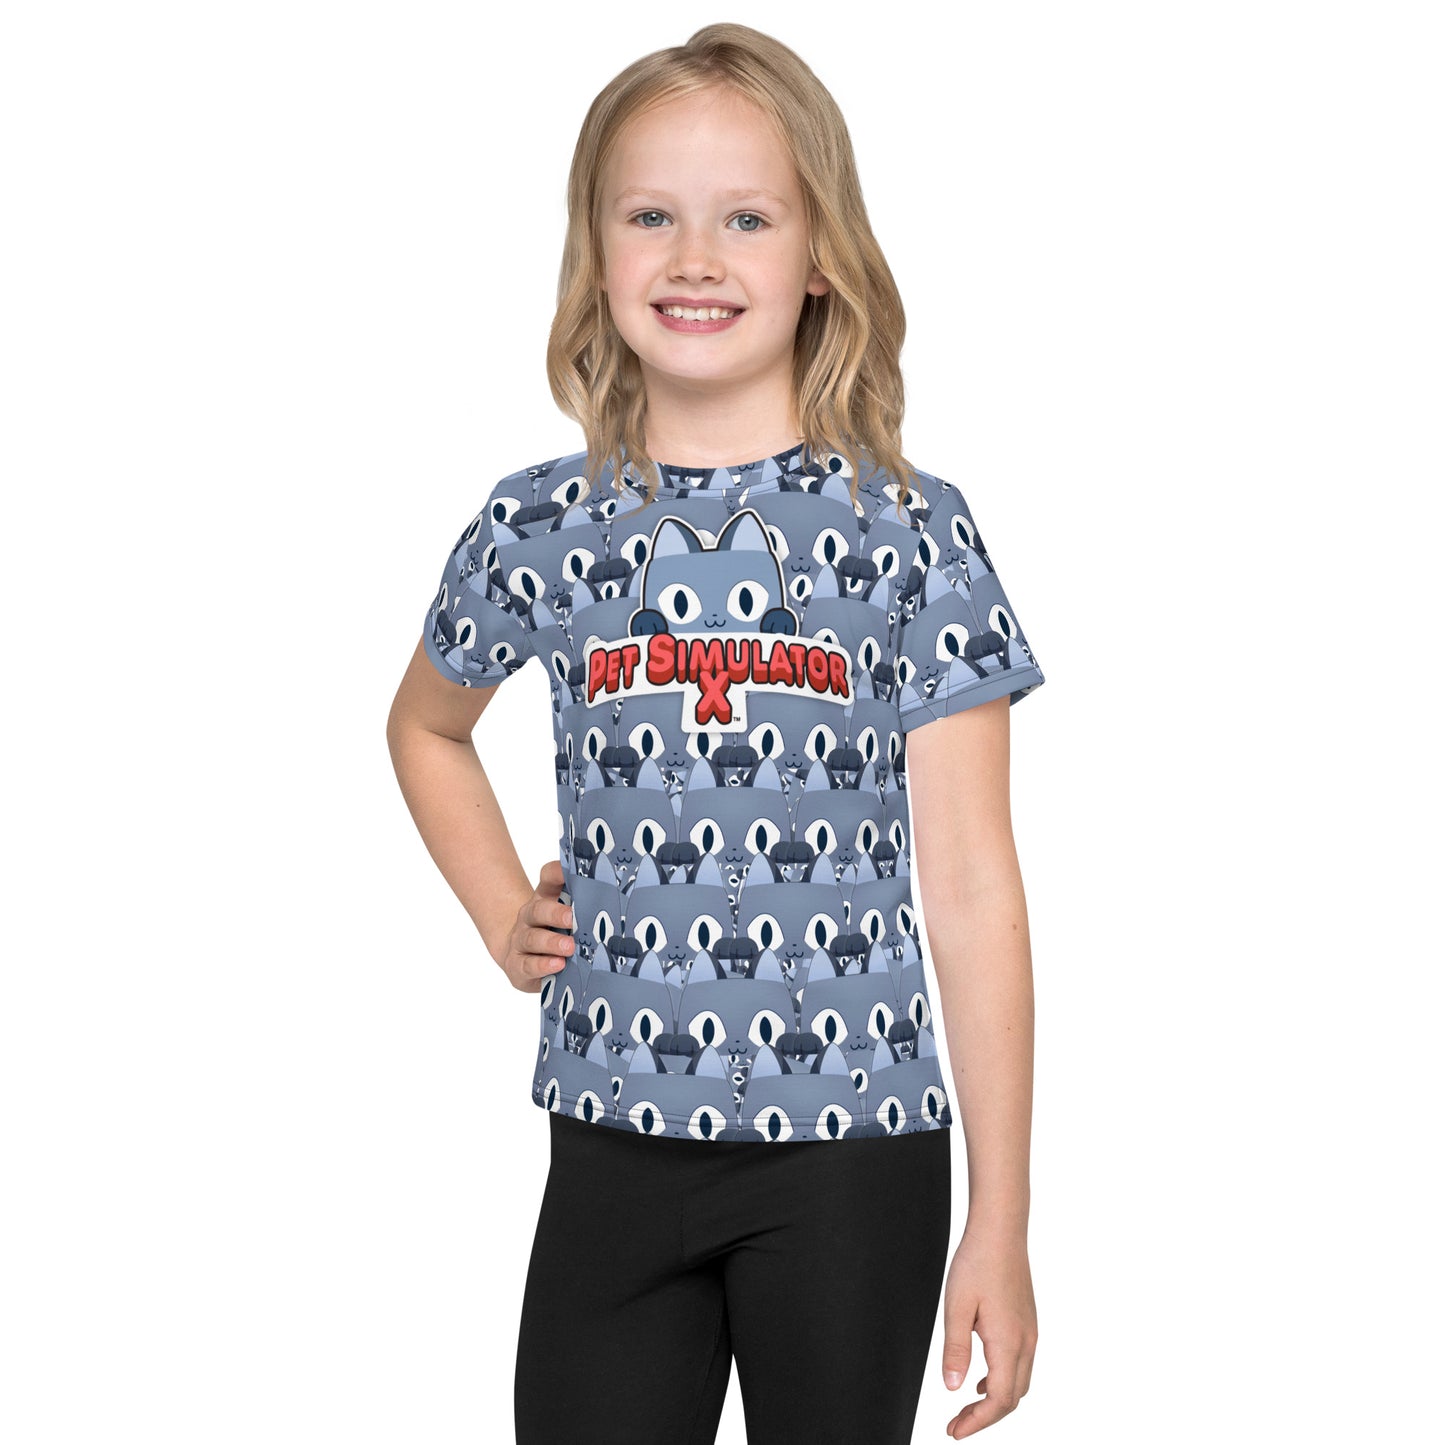 Toddlers Pet Simulator X - Roblox - All-Over Print T-Shirt